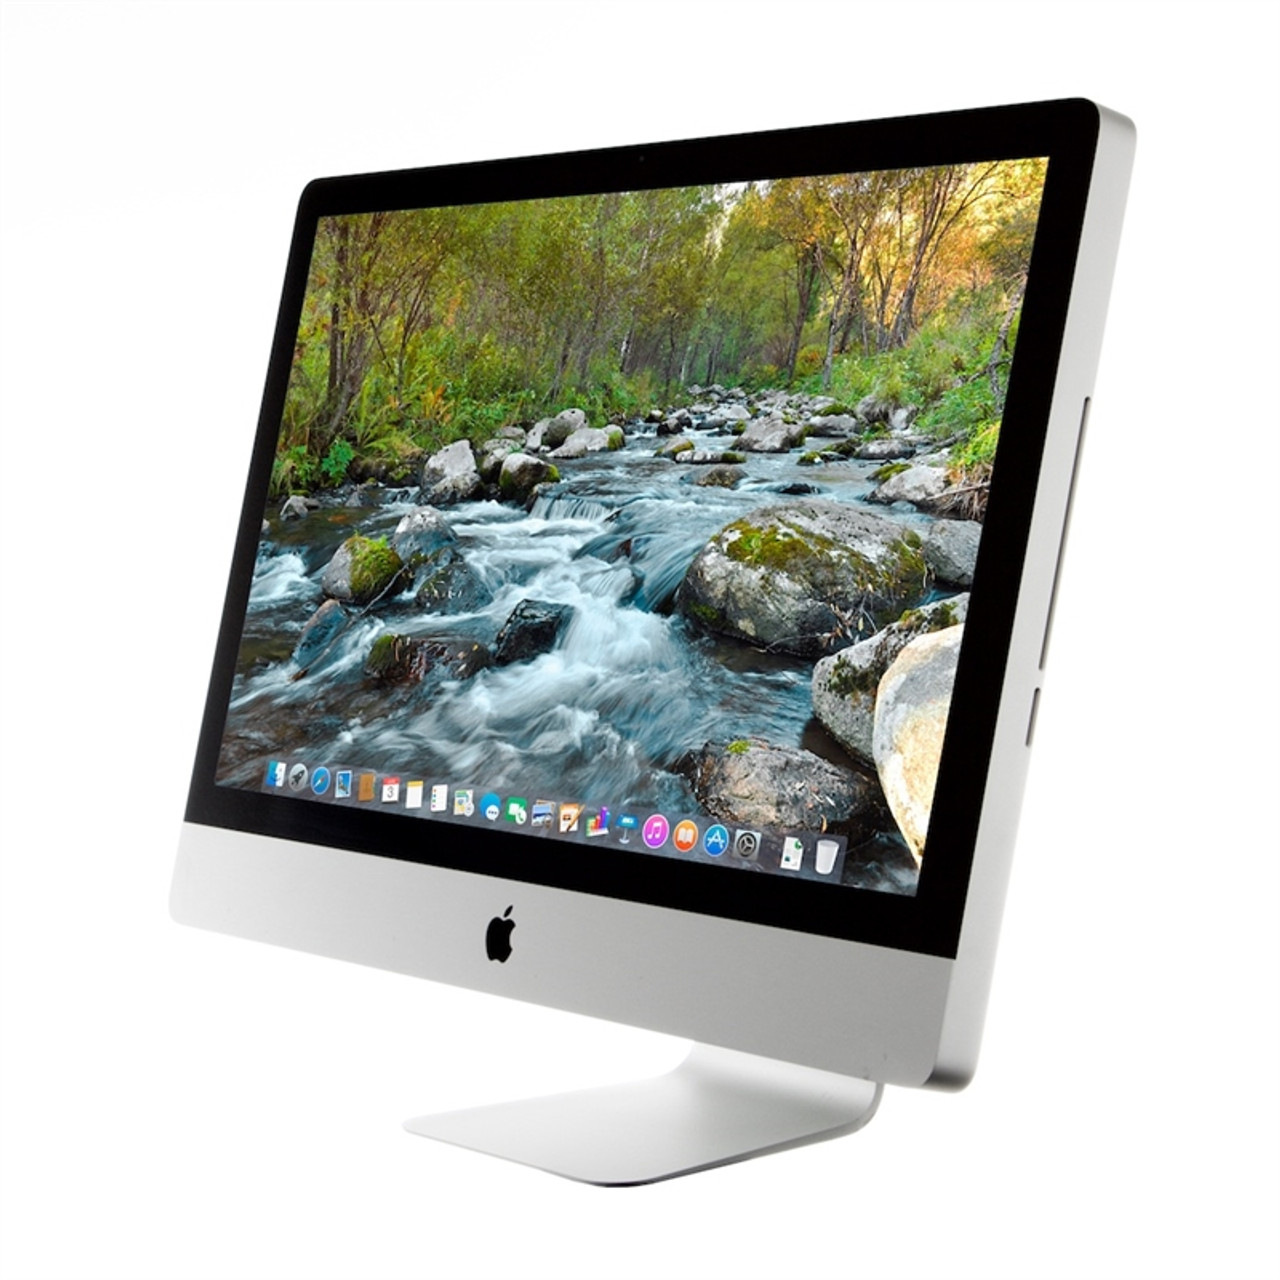 Shining padle forskel iMac 27" 2.93GHz (Mid 2010) | mac of all trades